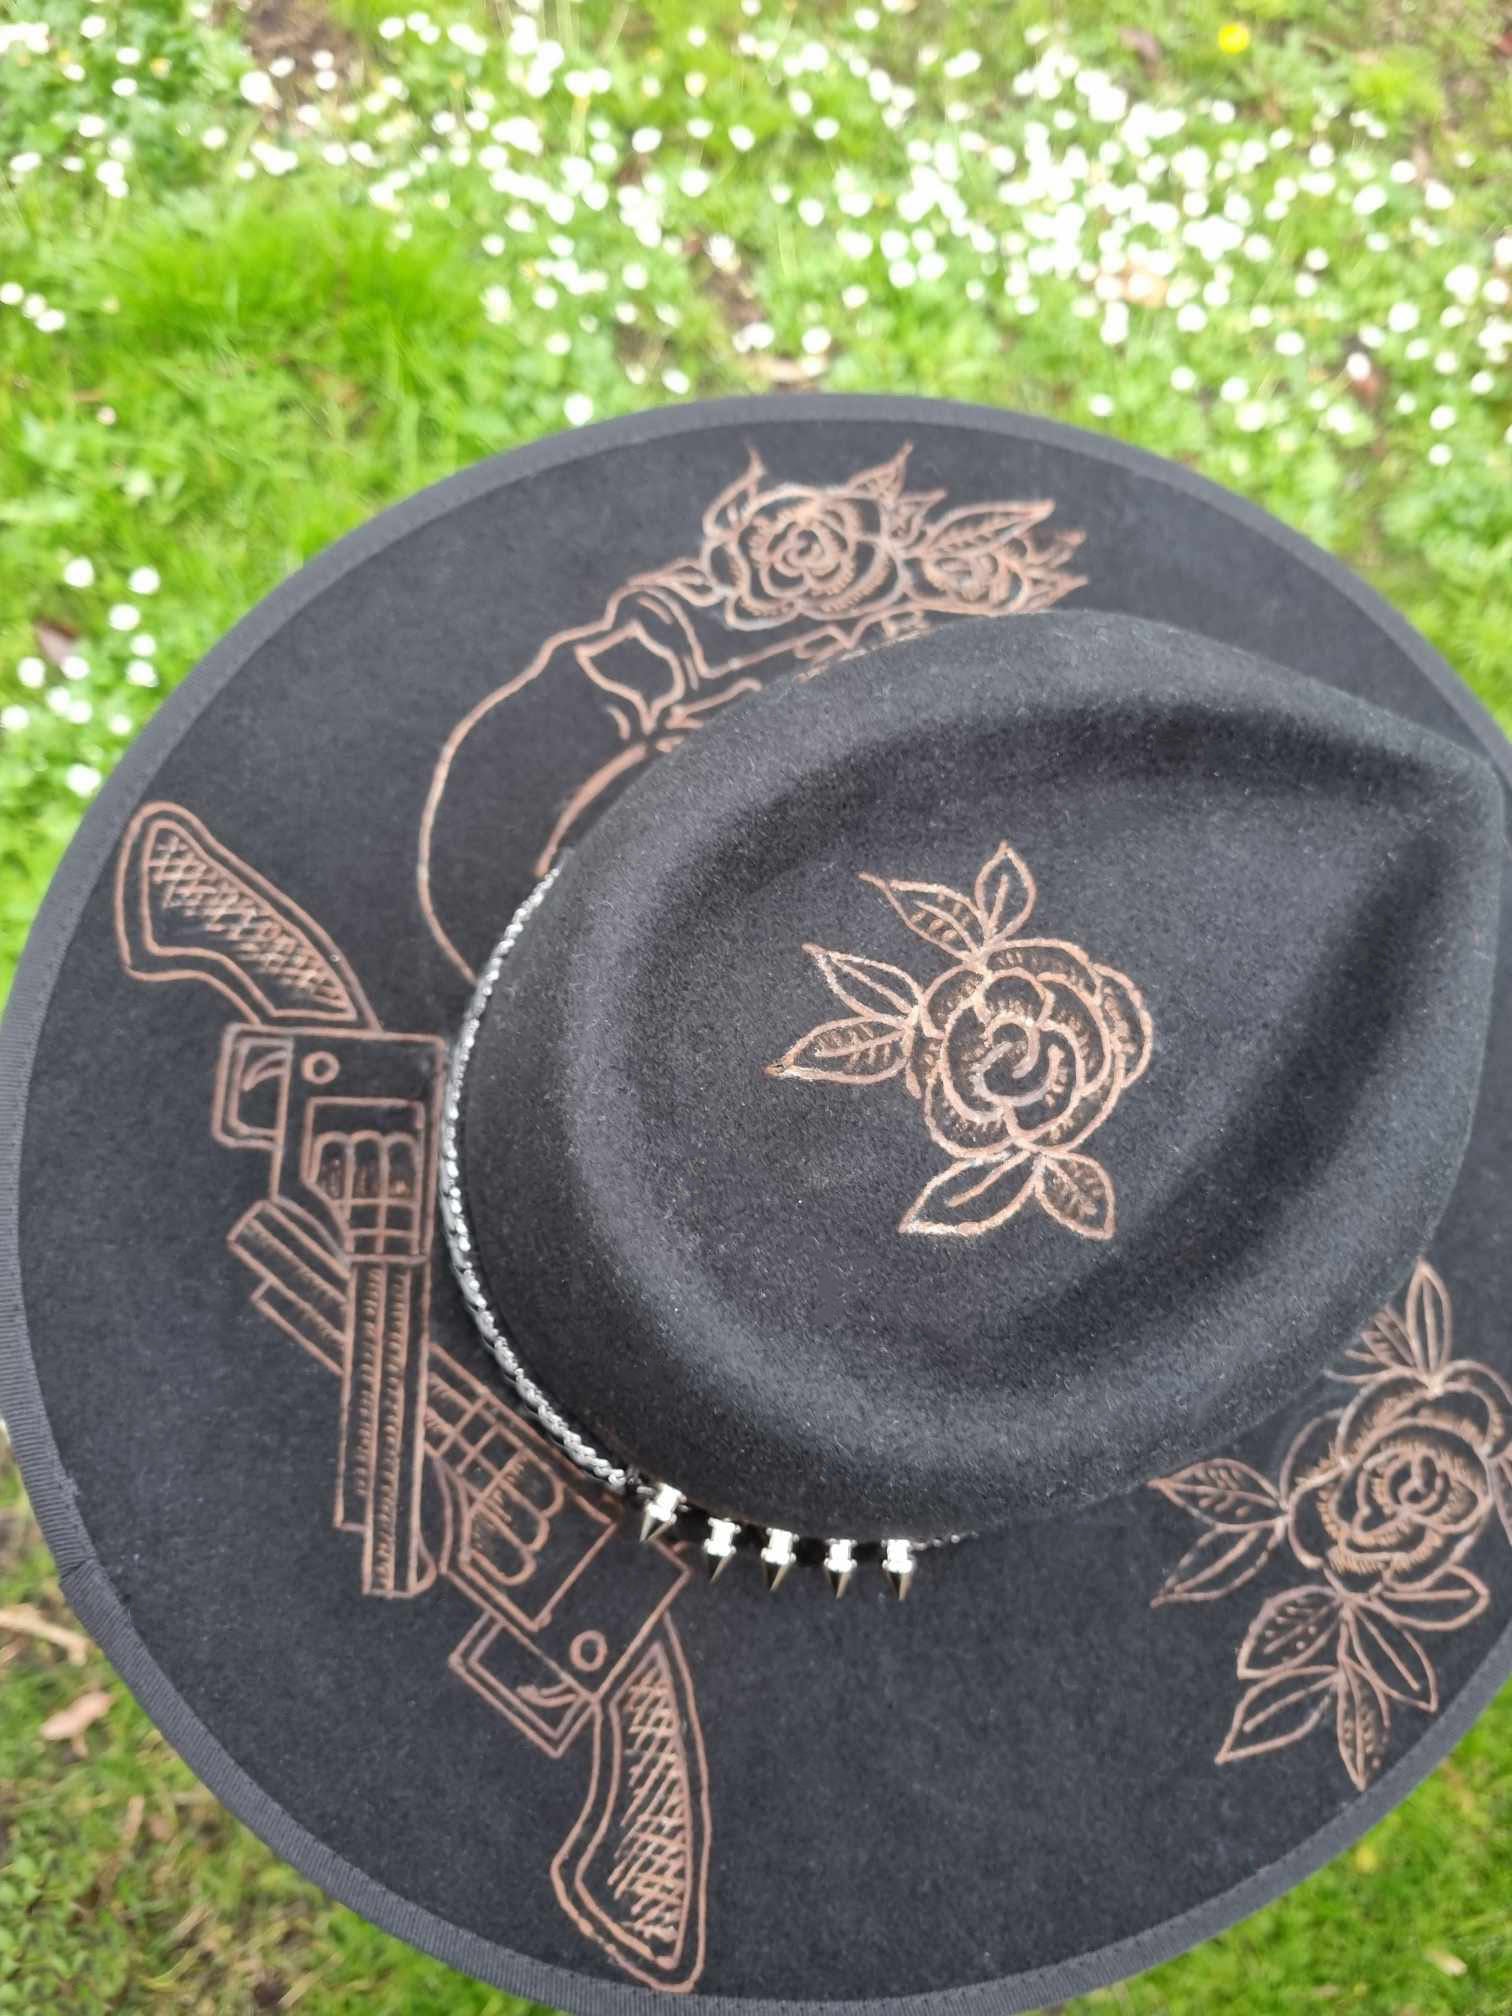 The Outlaw Hat